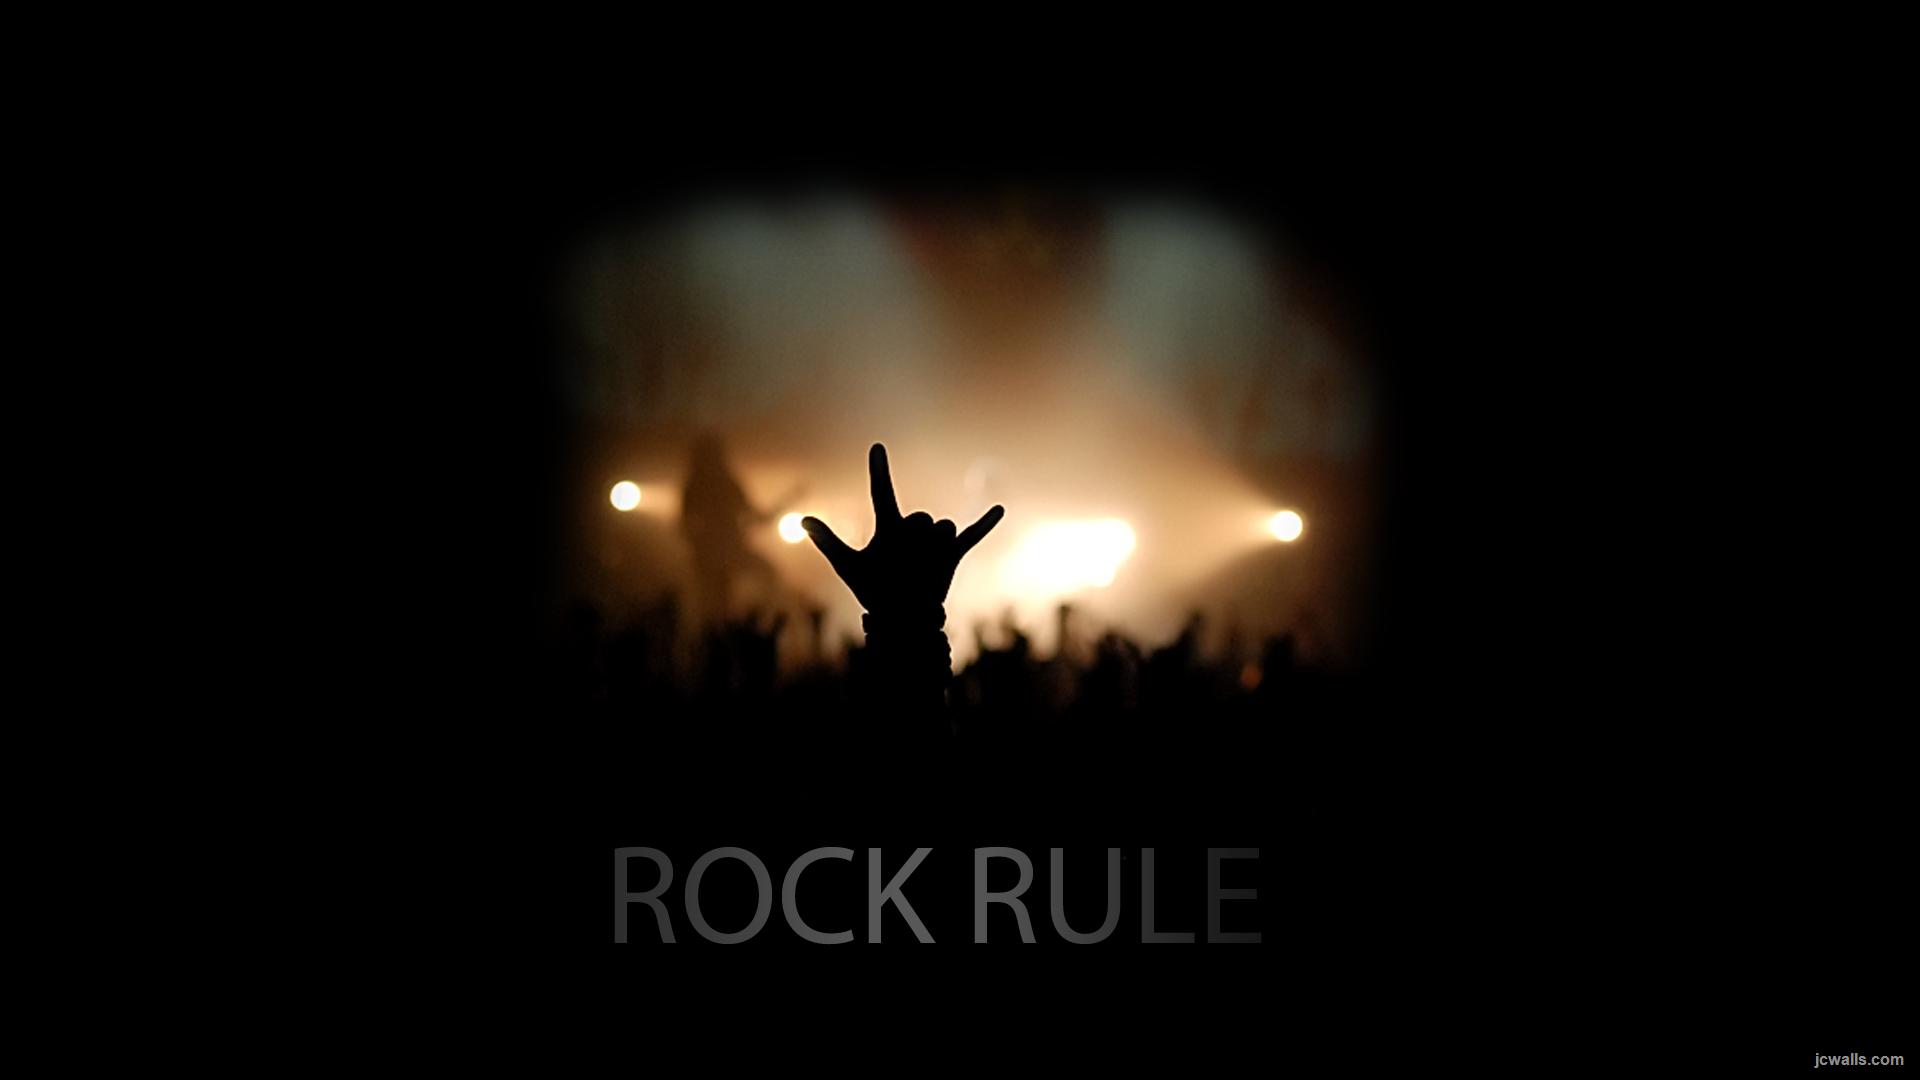 Wallpapers Rock Music Rules 1920x1080 #rock